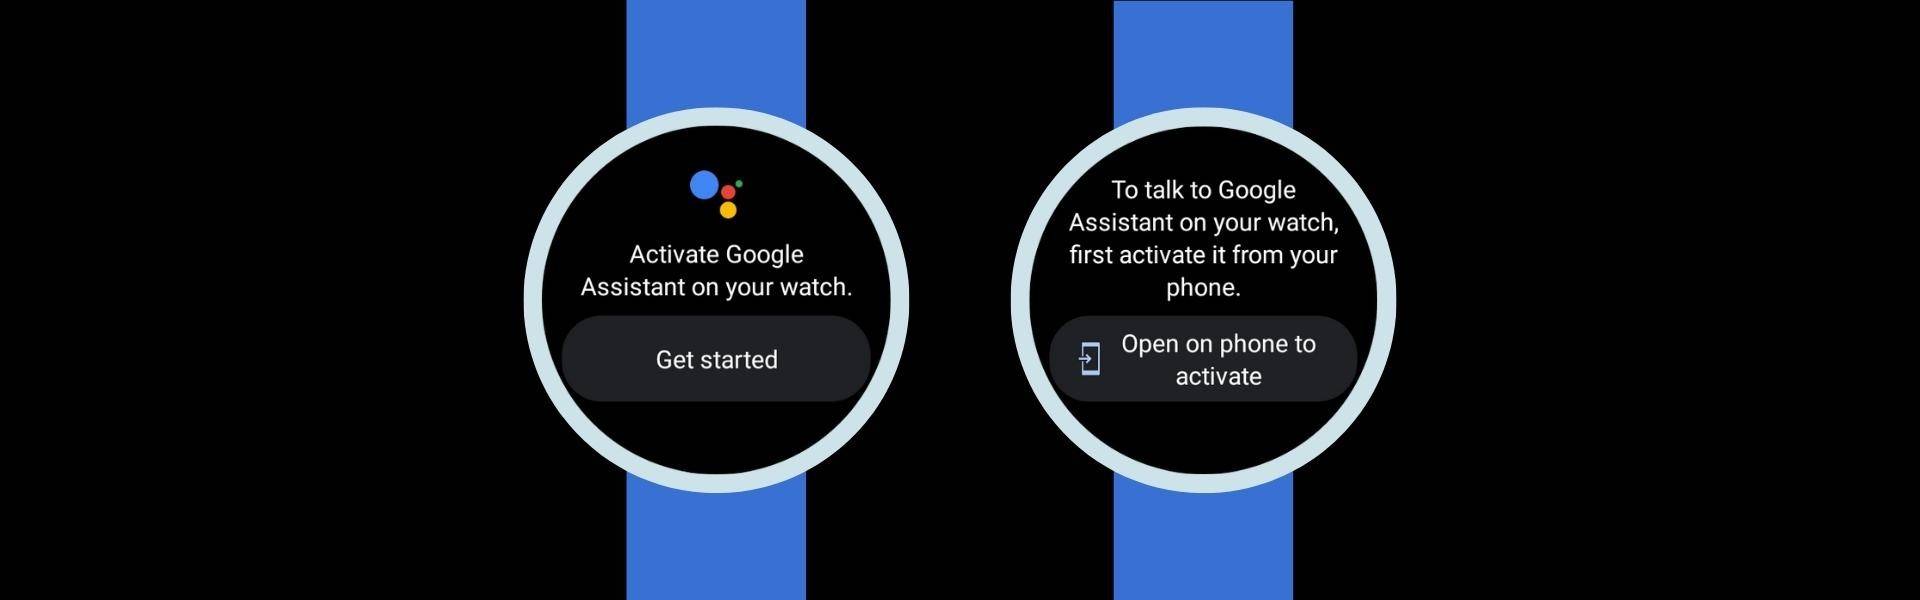 graphics showcasing how users can set up Google Assistant on Galaxy Watch 4